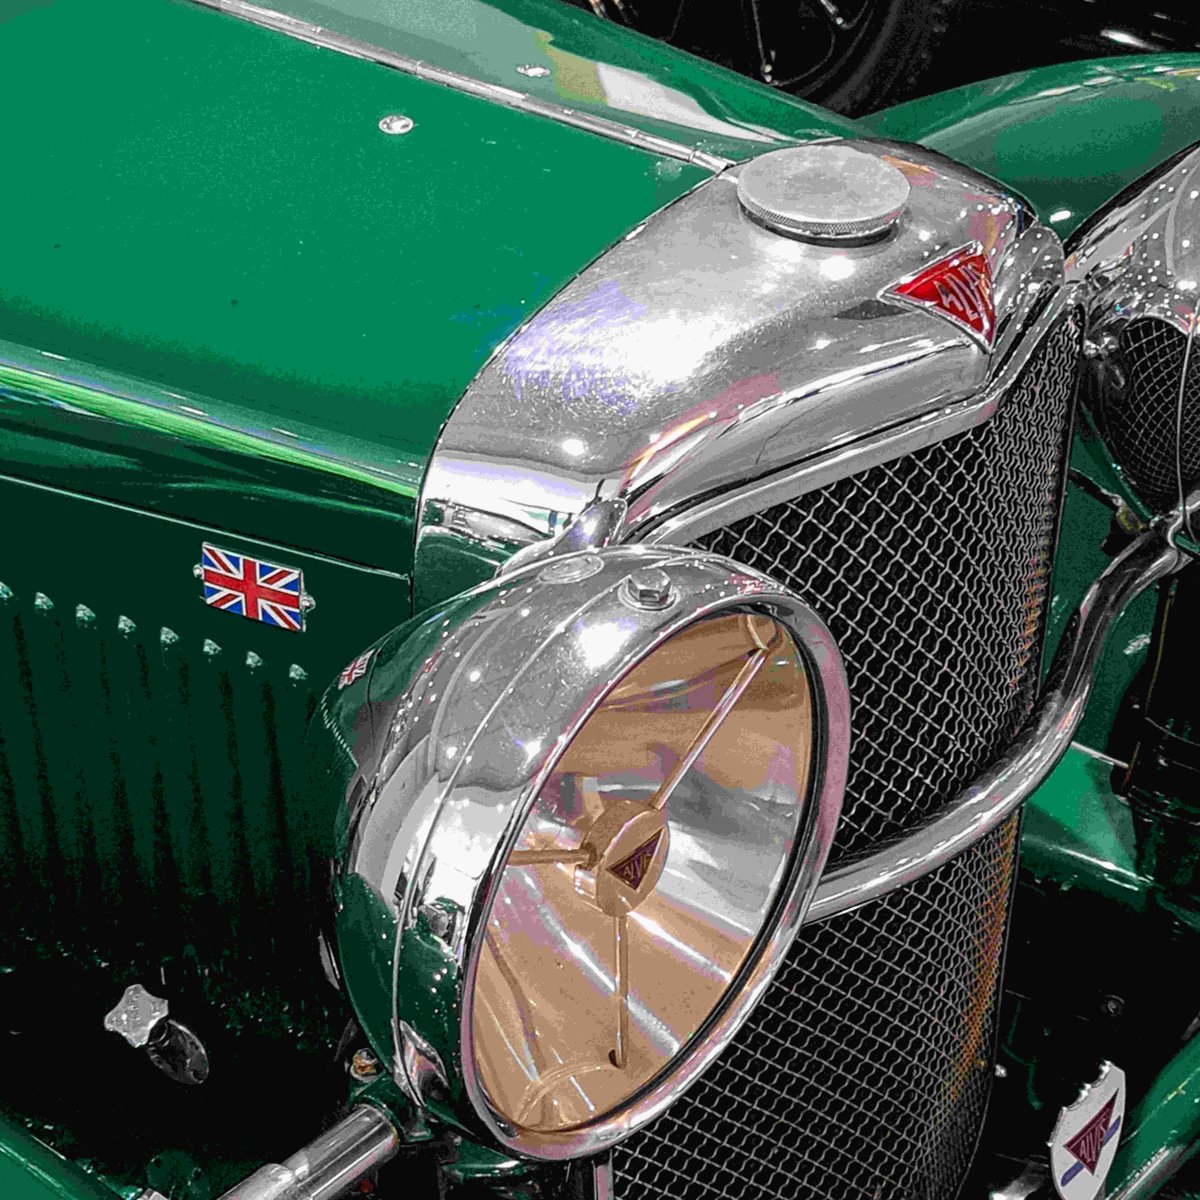 Handmade in the UK, as they always have been 🇬🇧 #Alvis